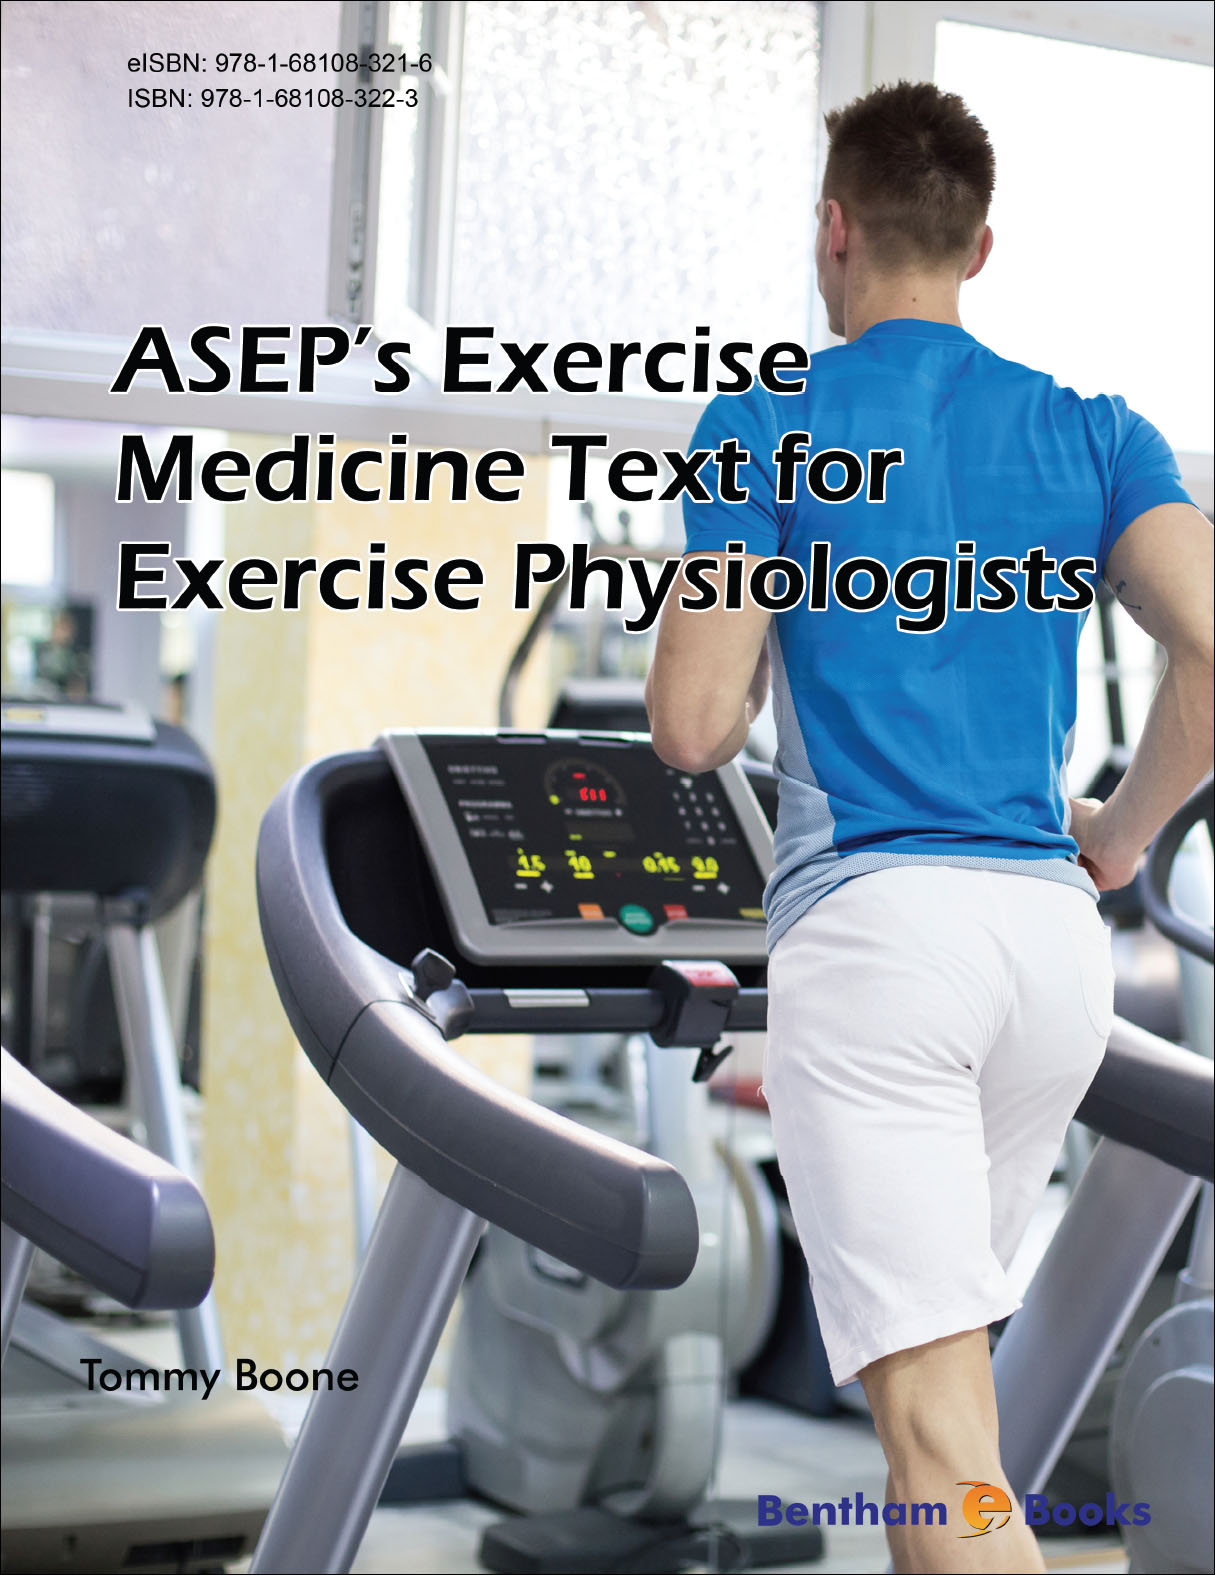 ASEP's Exercise Medicine Text for Exercise Physiologists